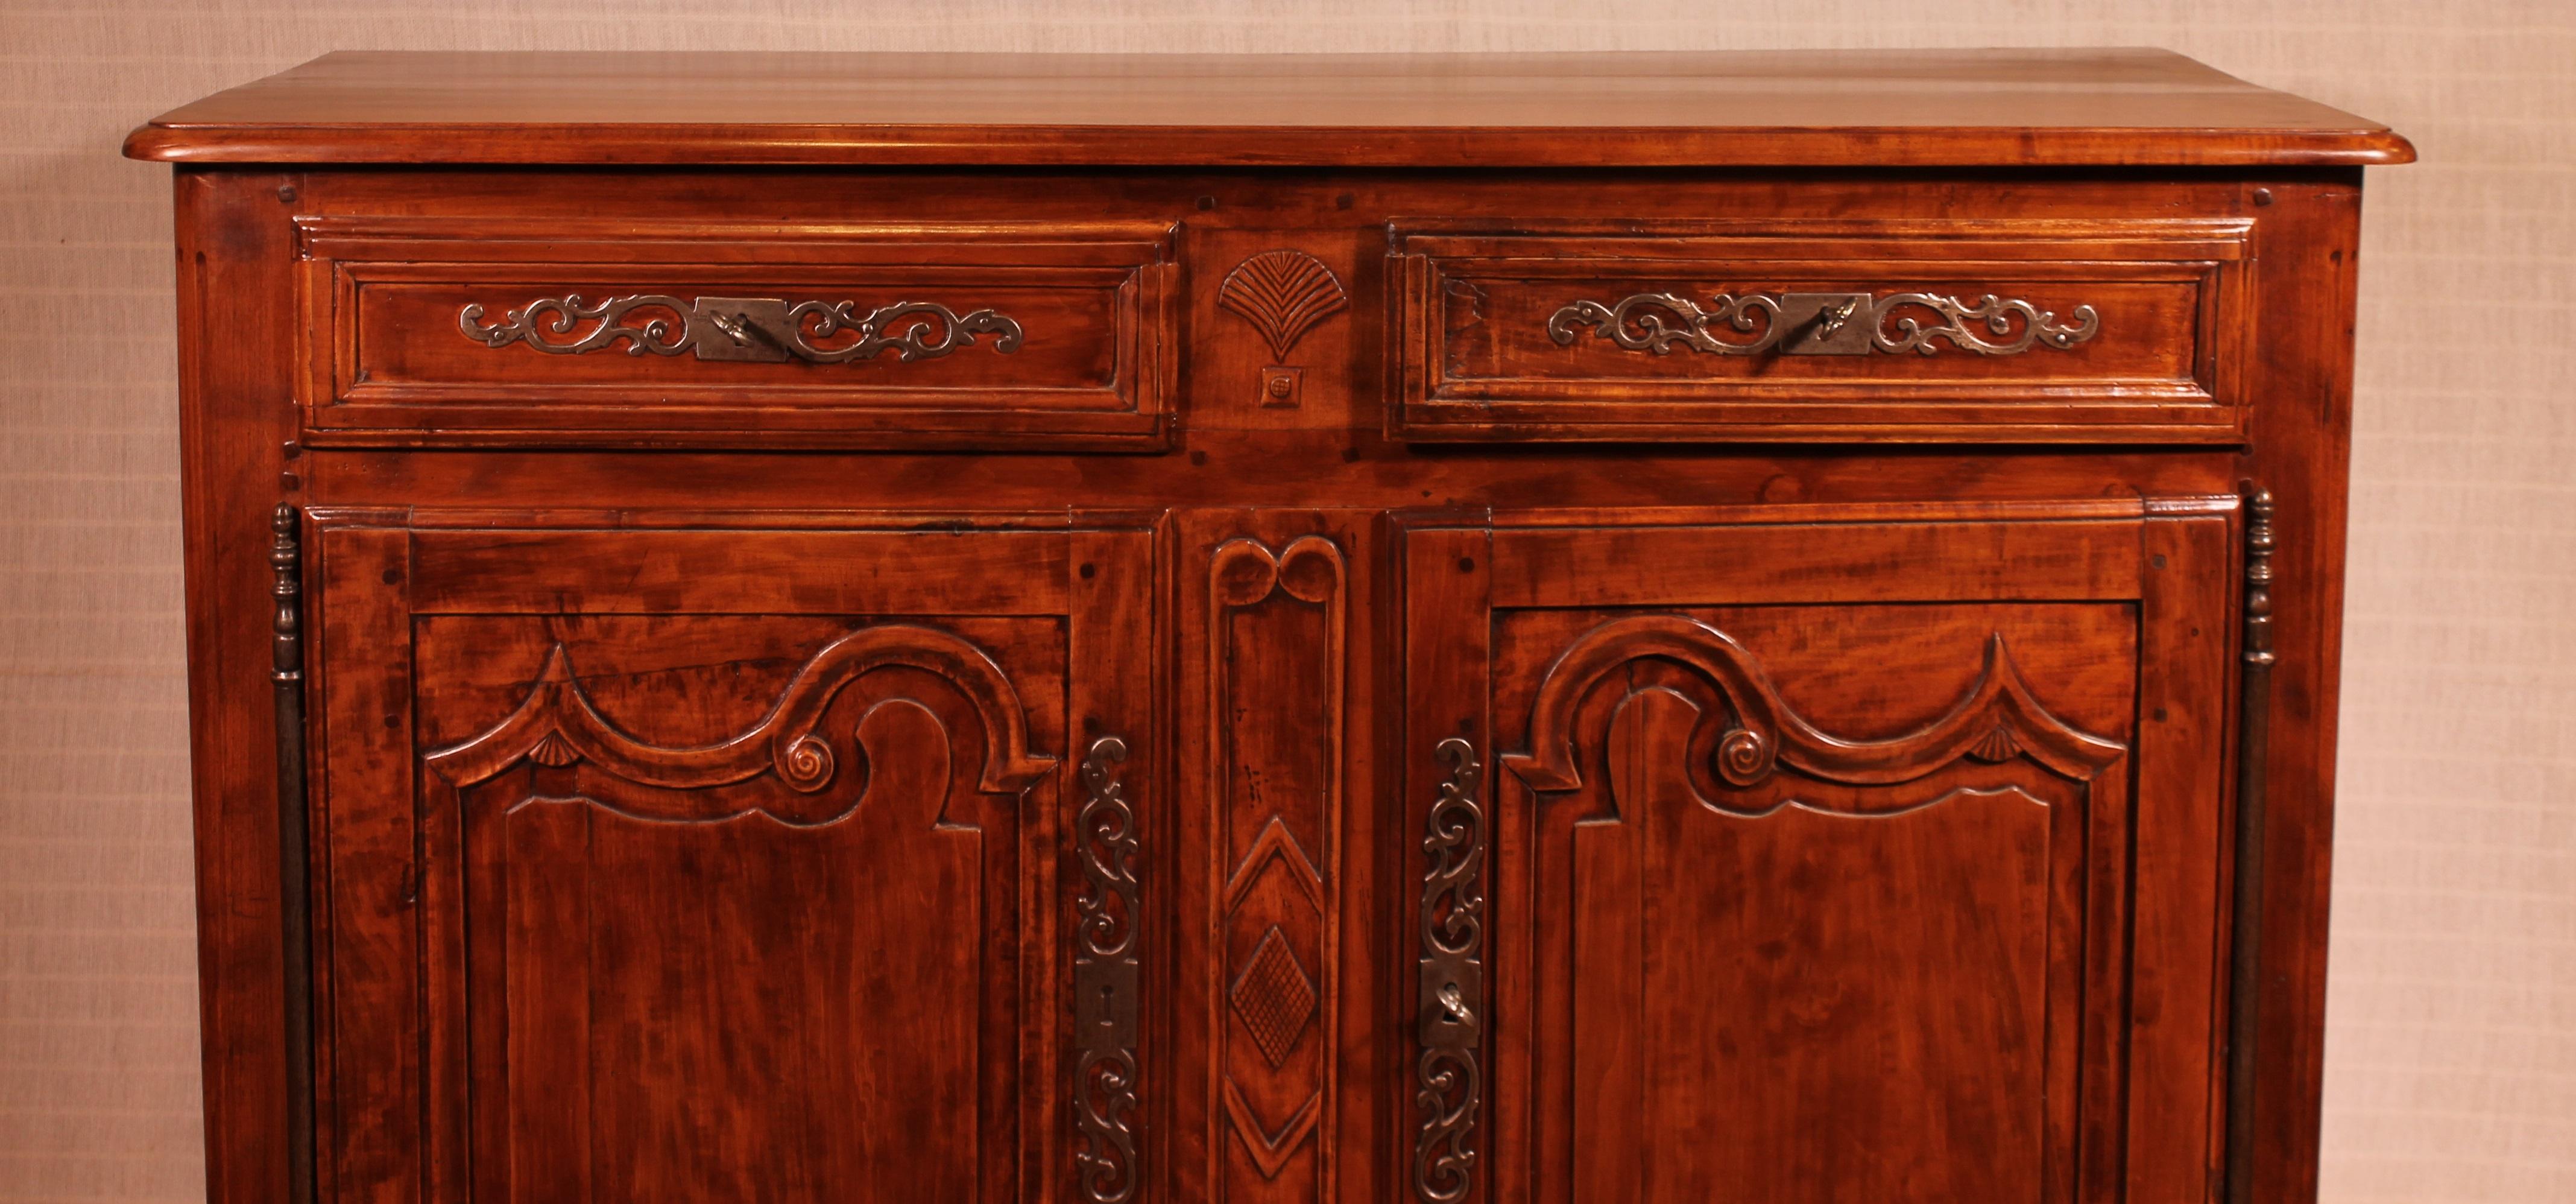 A fine Louis XV cherrywood buffet from the 18th century from France.

Very elegant credenza or buffet which opens with two large molded doors with asymmetrical carvings. Moreover, the buffet has two equally molded drawers

The sides of the